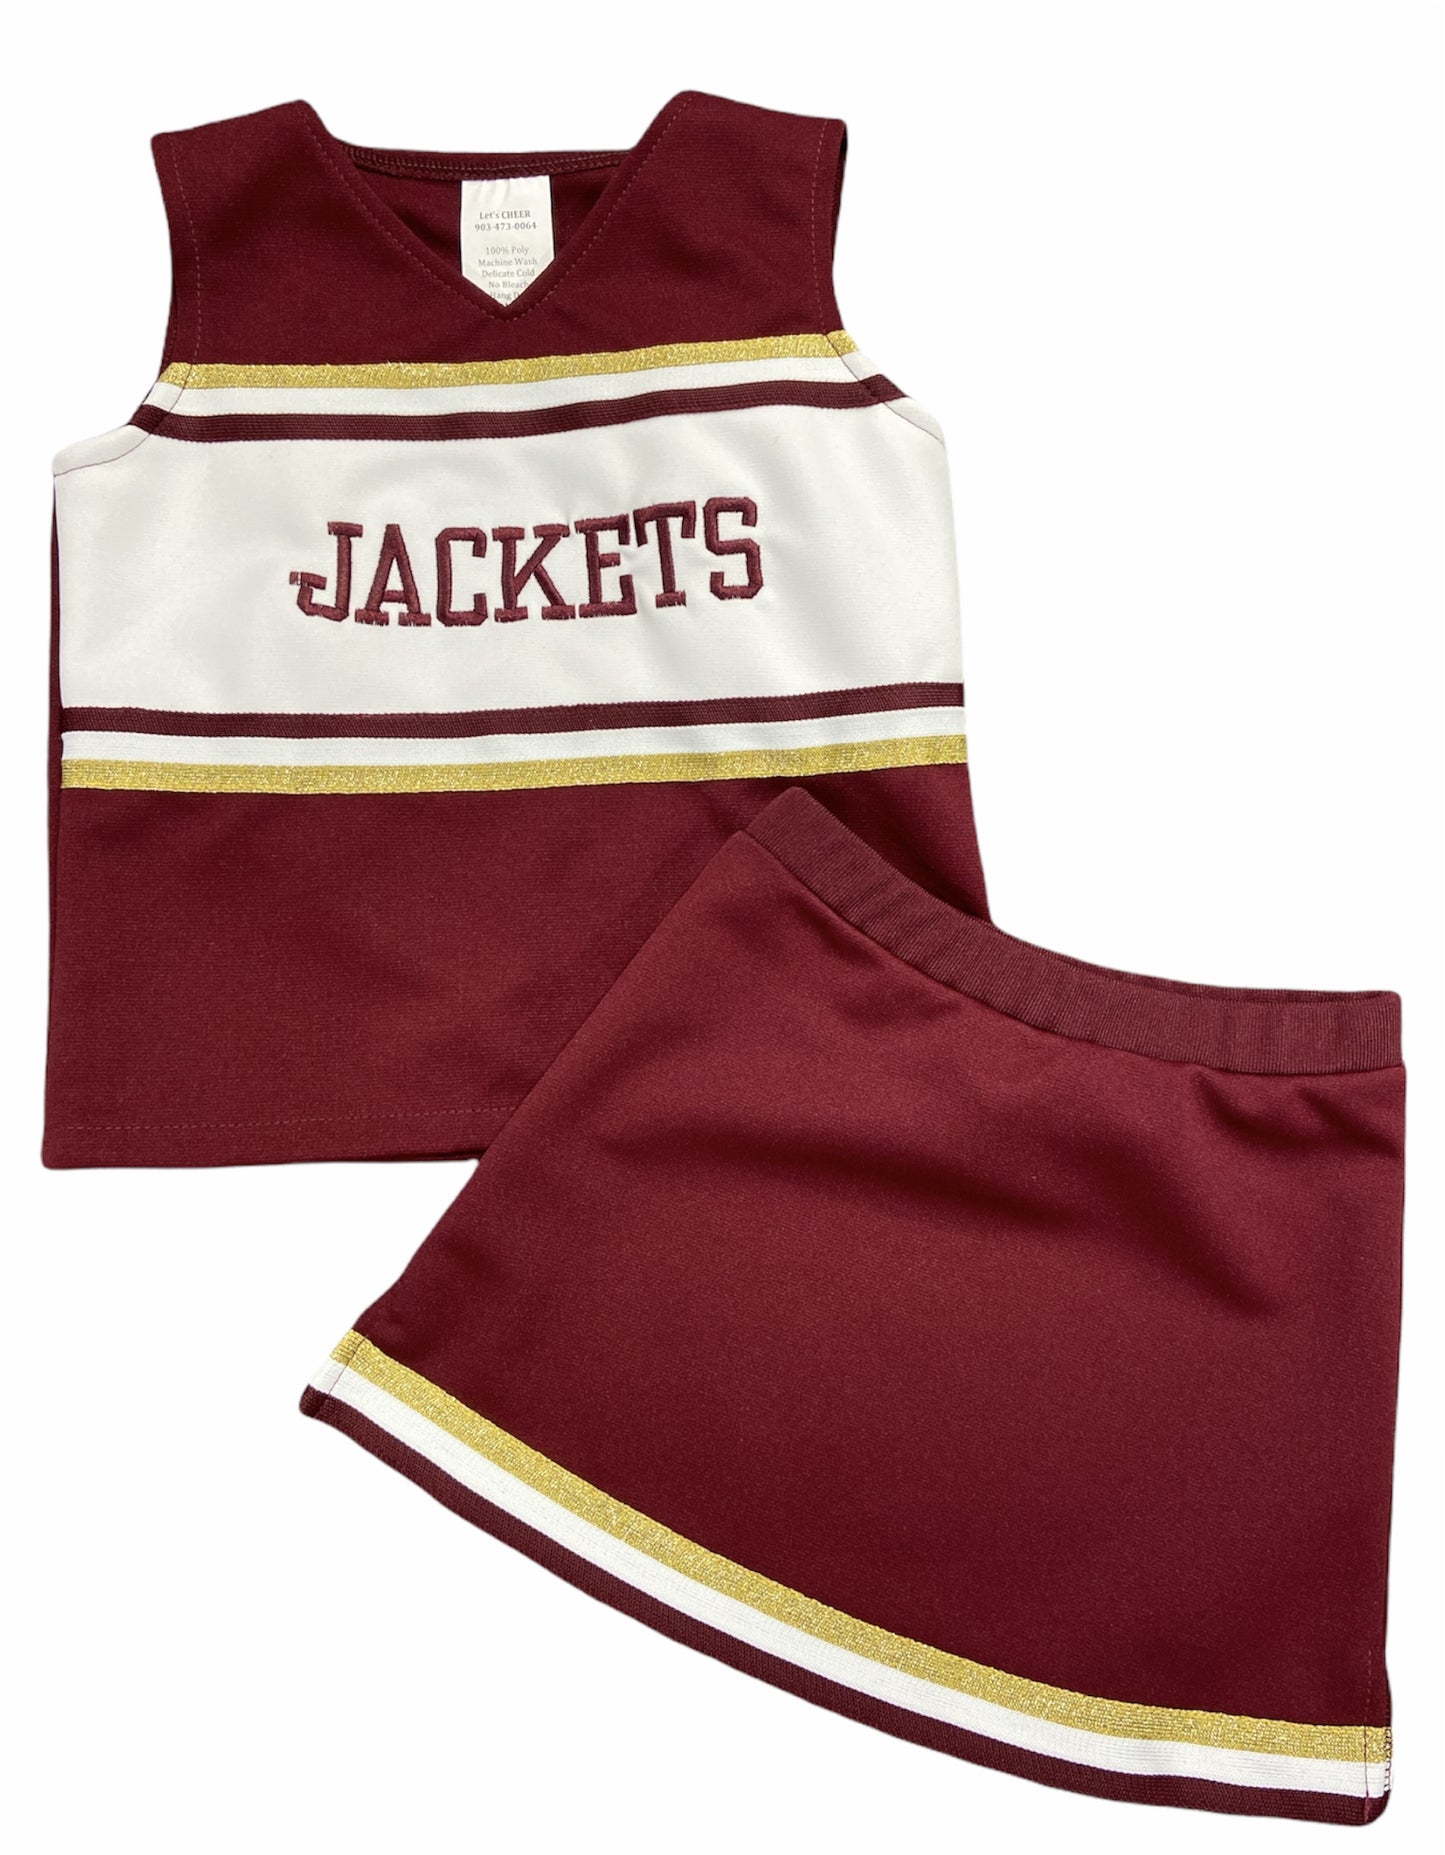 Jackets Maroon/Gold Cheer Suit